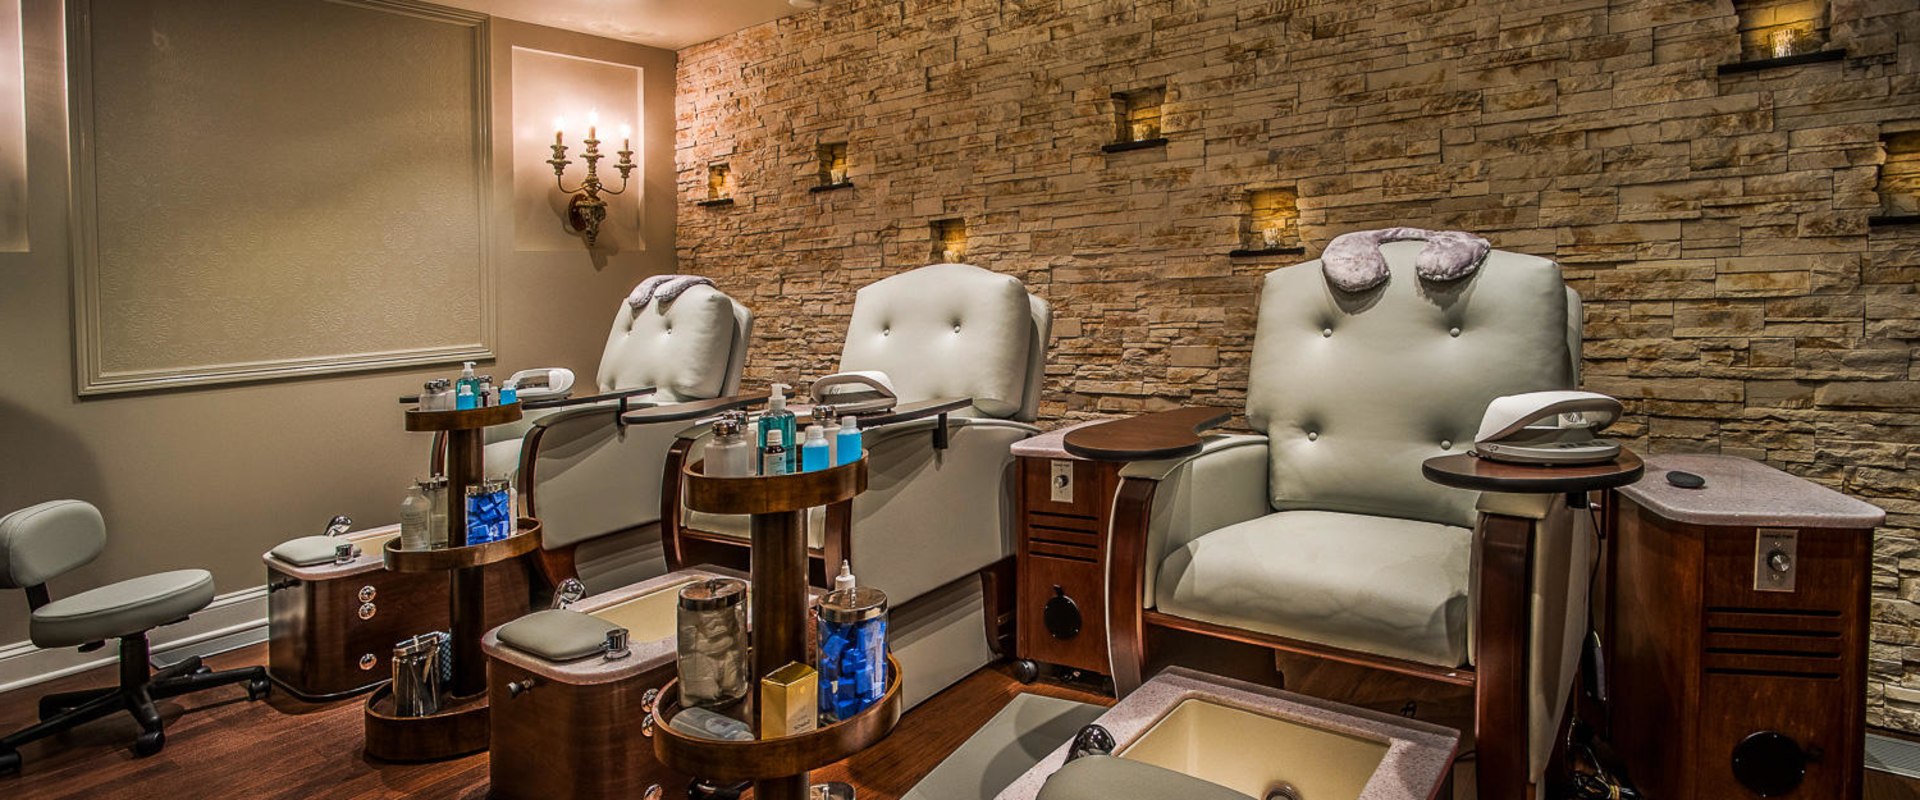 What is the Average Price Range for Services at Boutique Salons in Denver, CO?